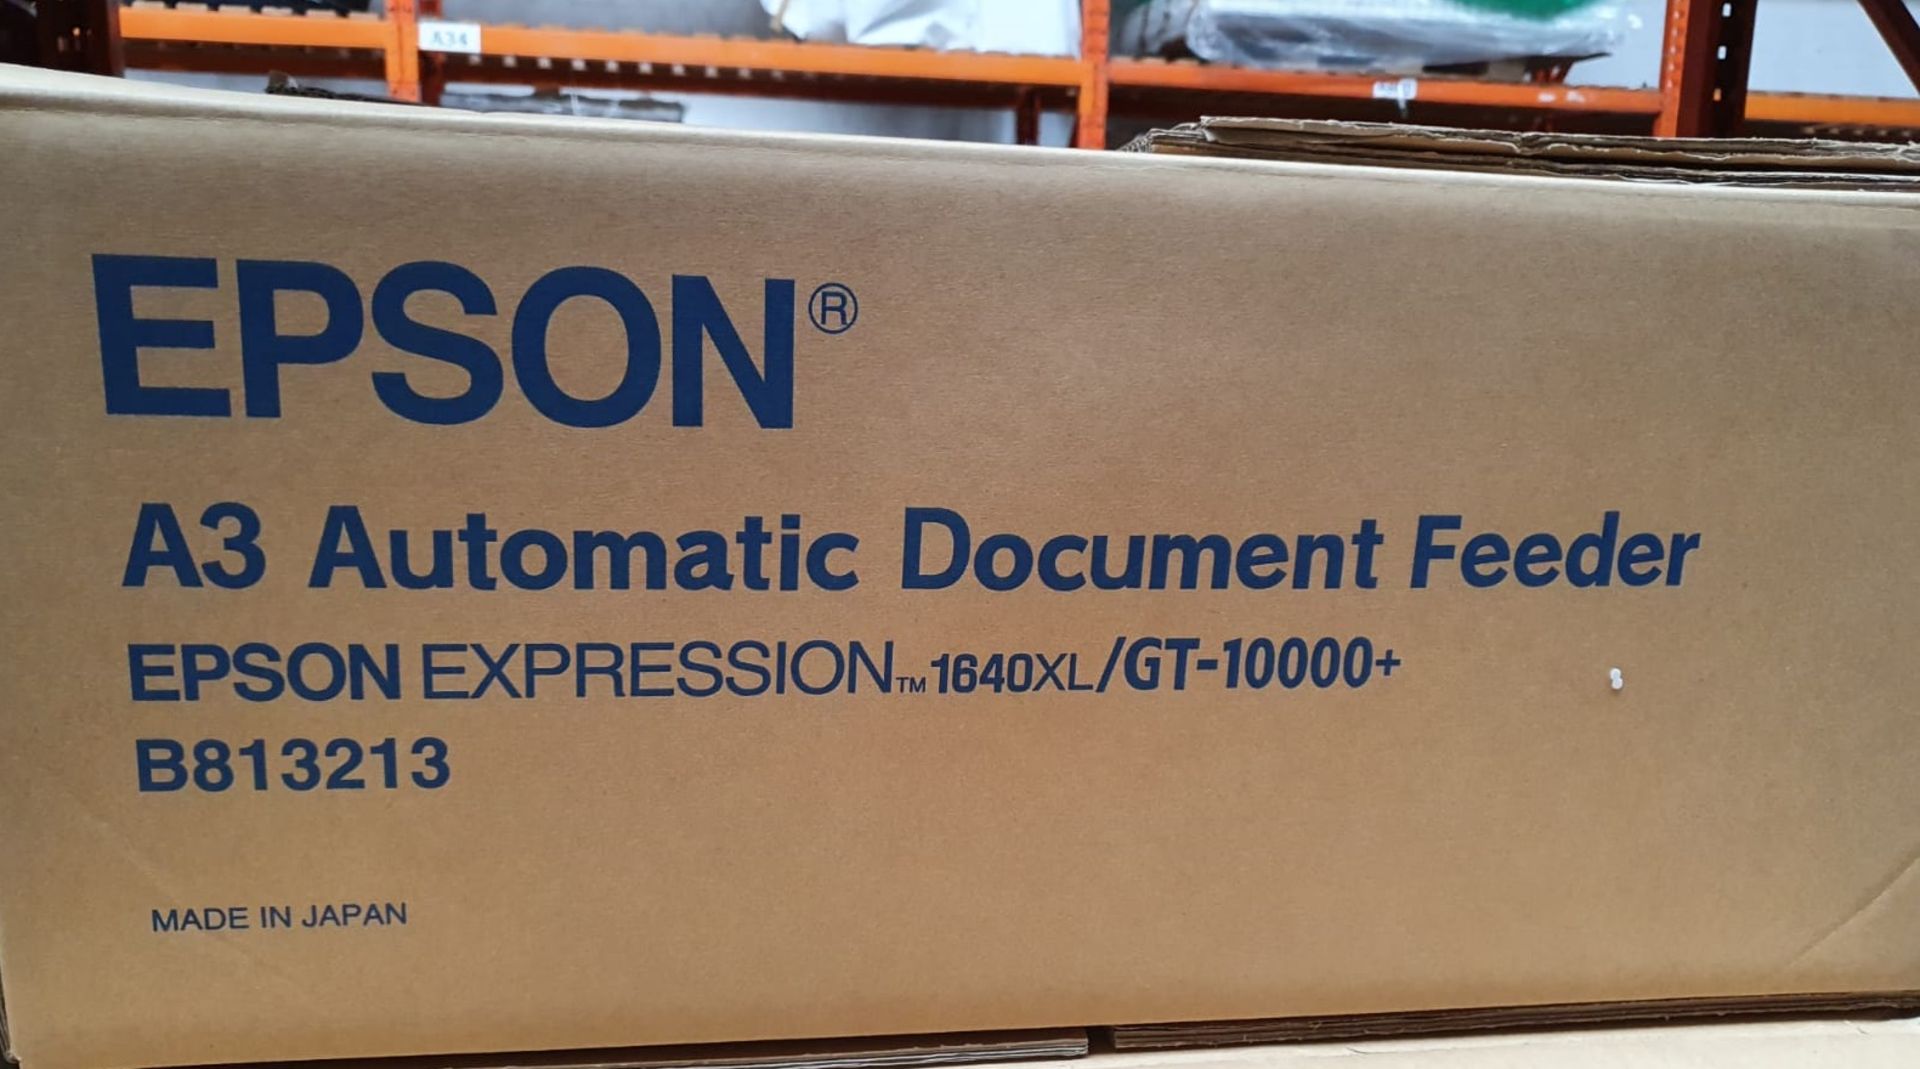 1 x Epson Automatic Document Feeder For Gt15000/1640Xl Scanners - Part Number B813213 - New in Box -